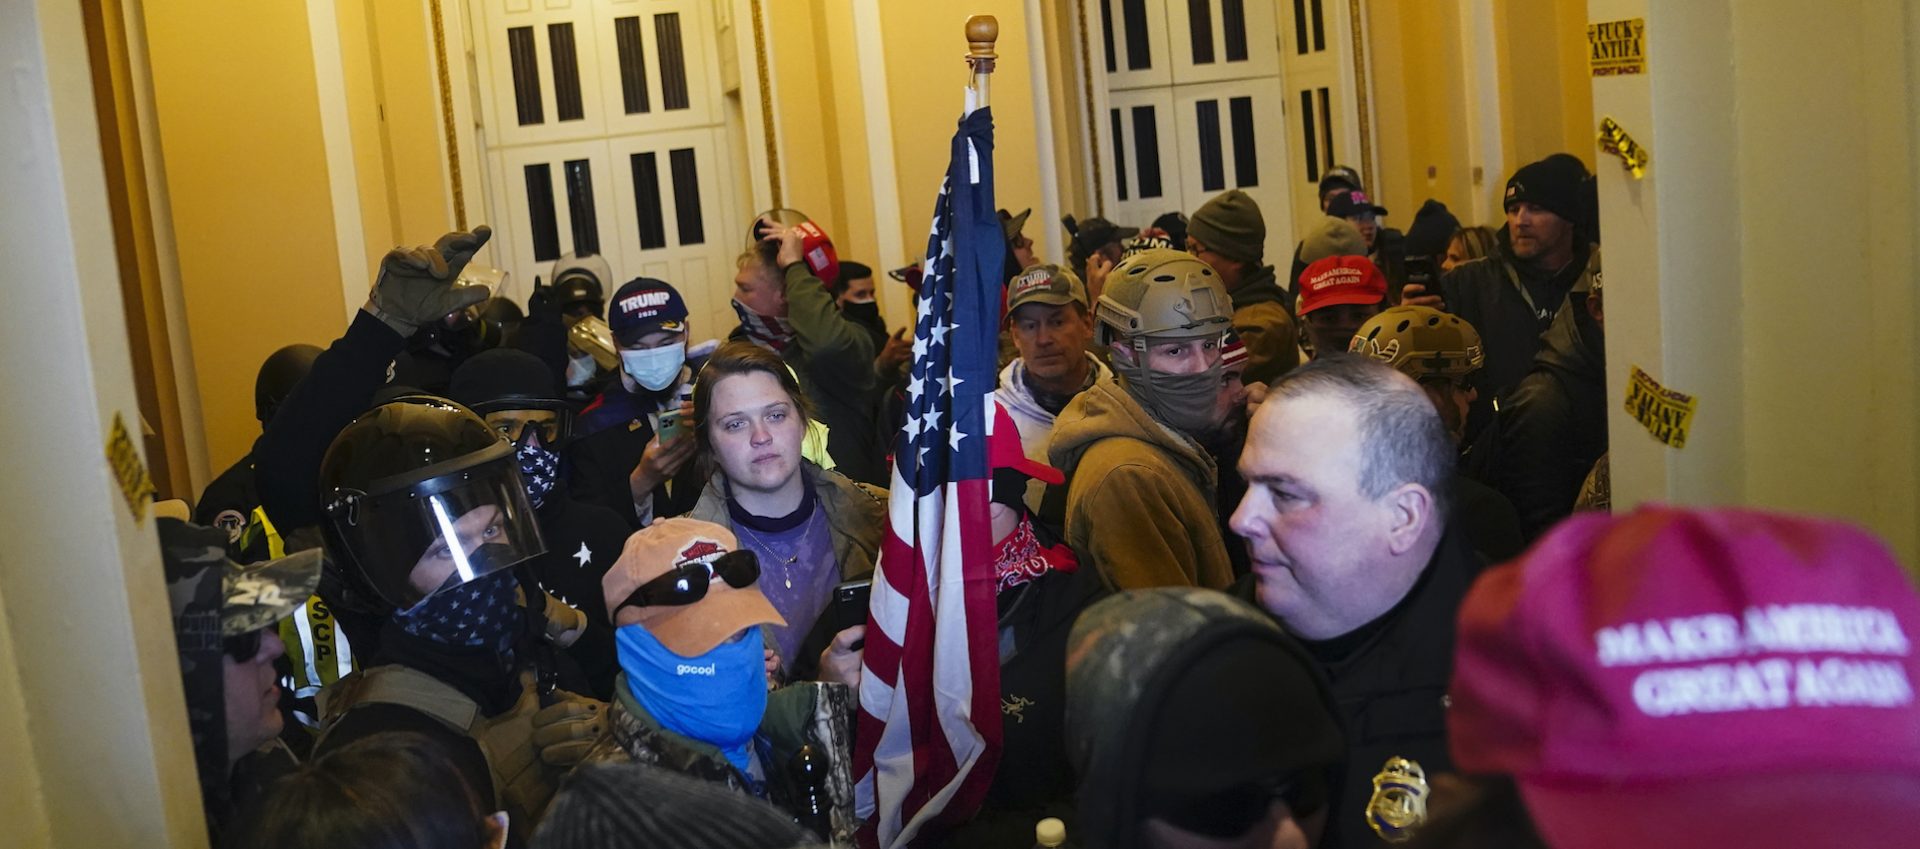 Supporters of President Donald Trump stand inside the U.S. Capitol on Wednesday, Jan. 6, 2021, in Washington.